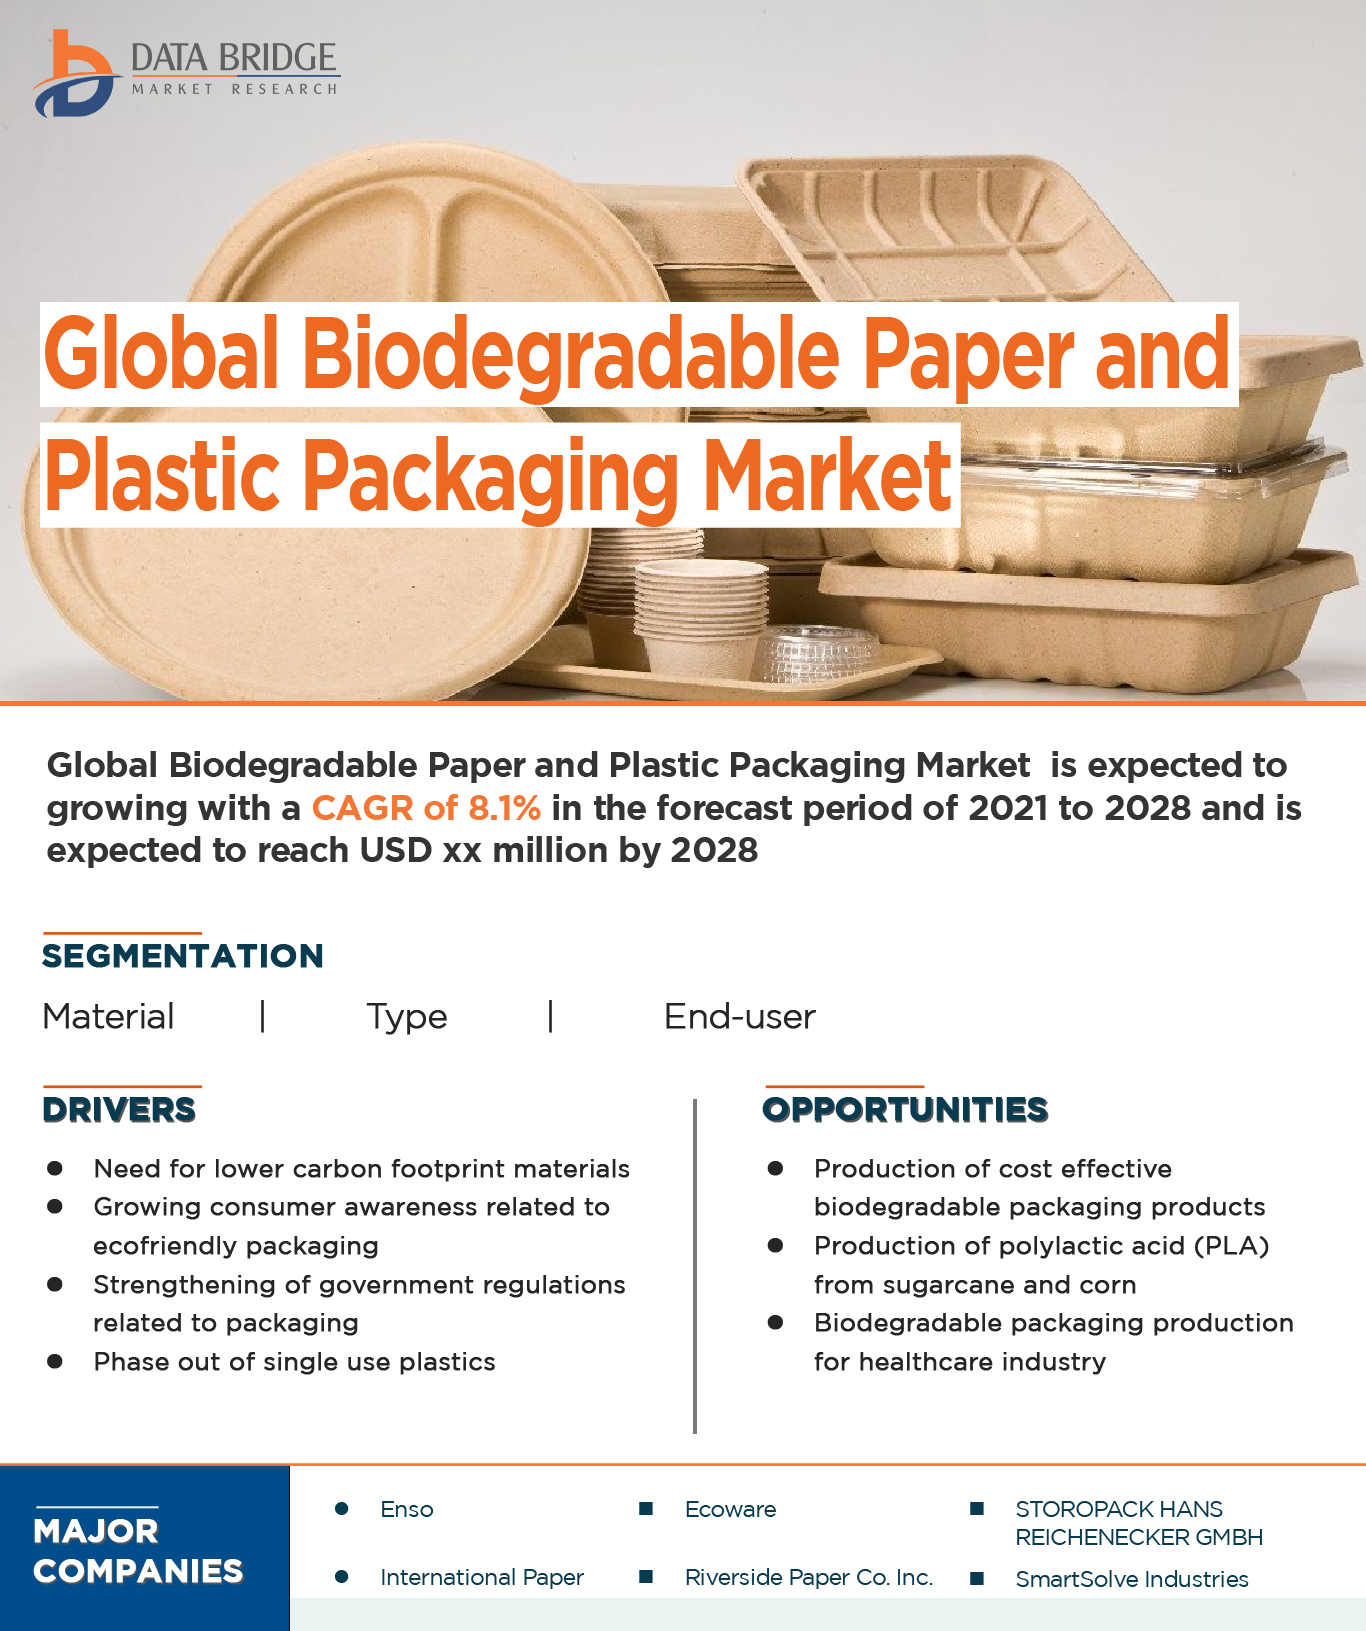 Biodegradable Paper and Plastic Packaging Market